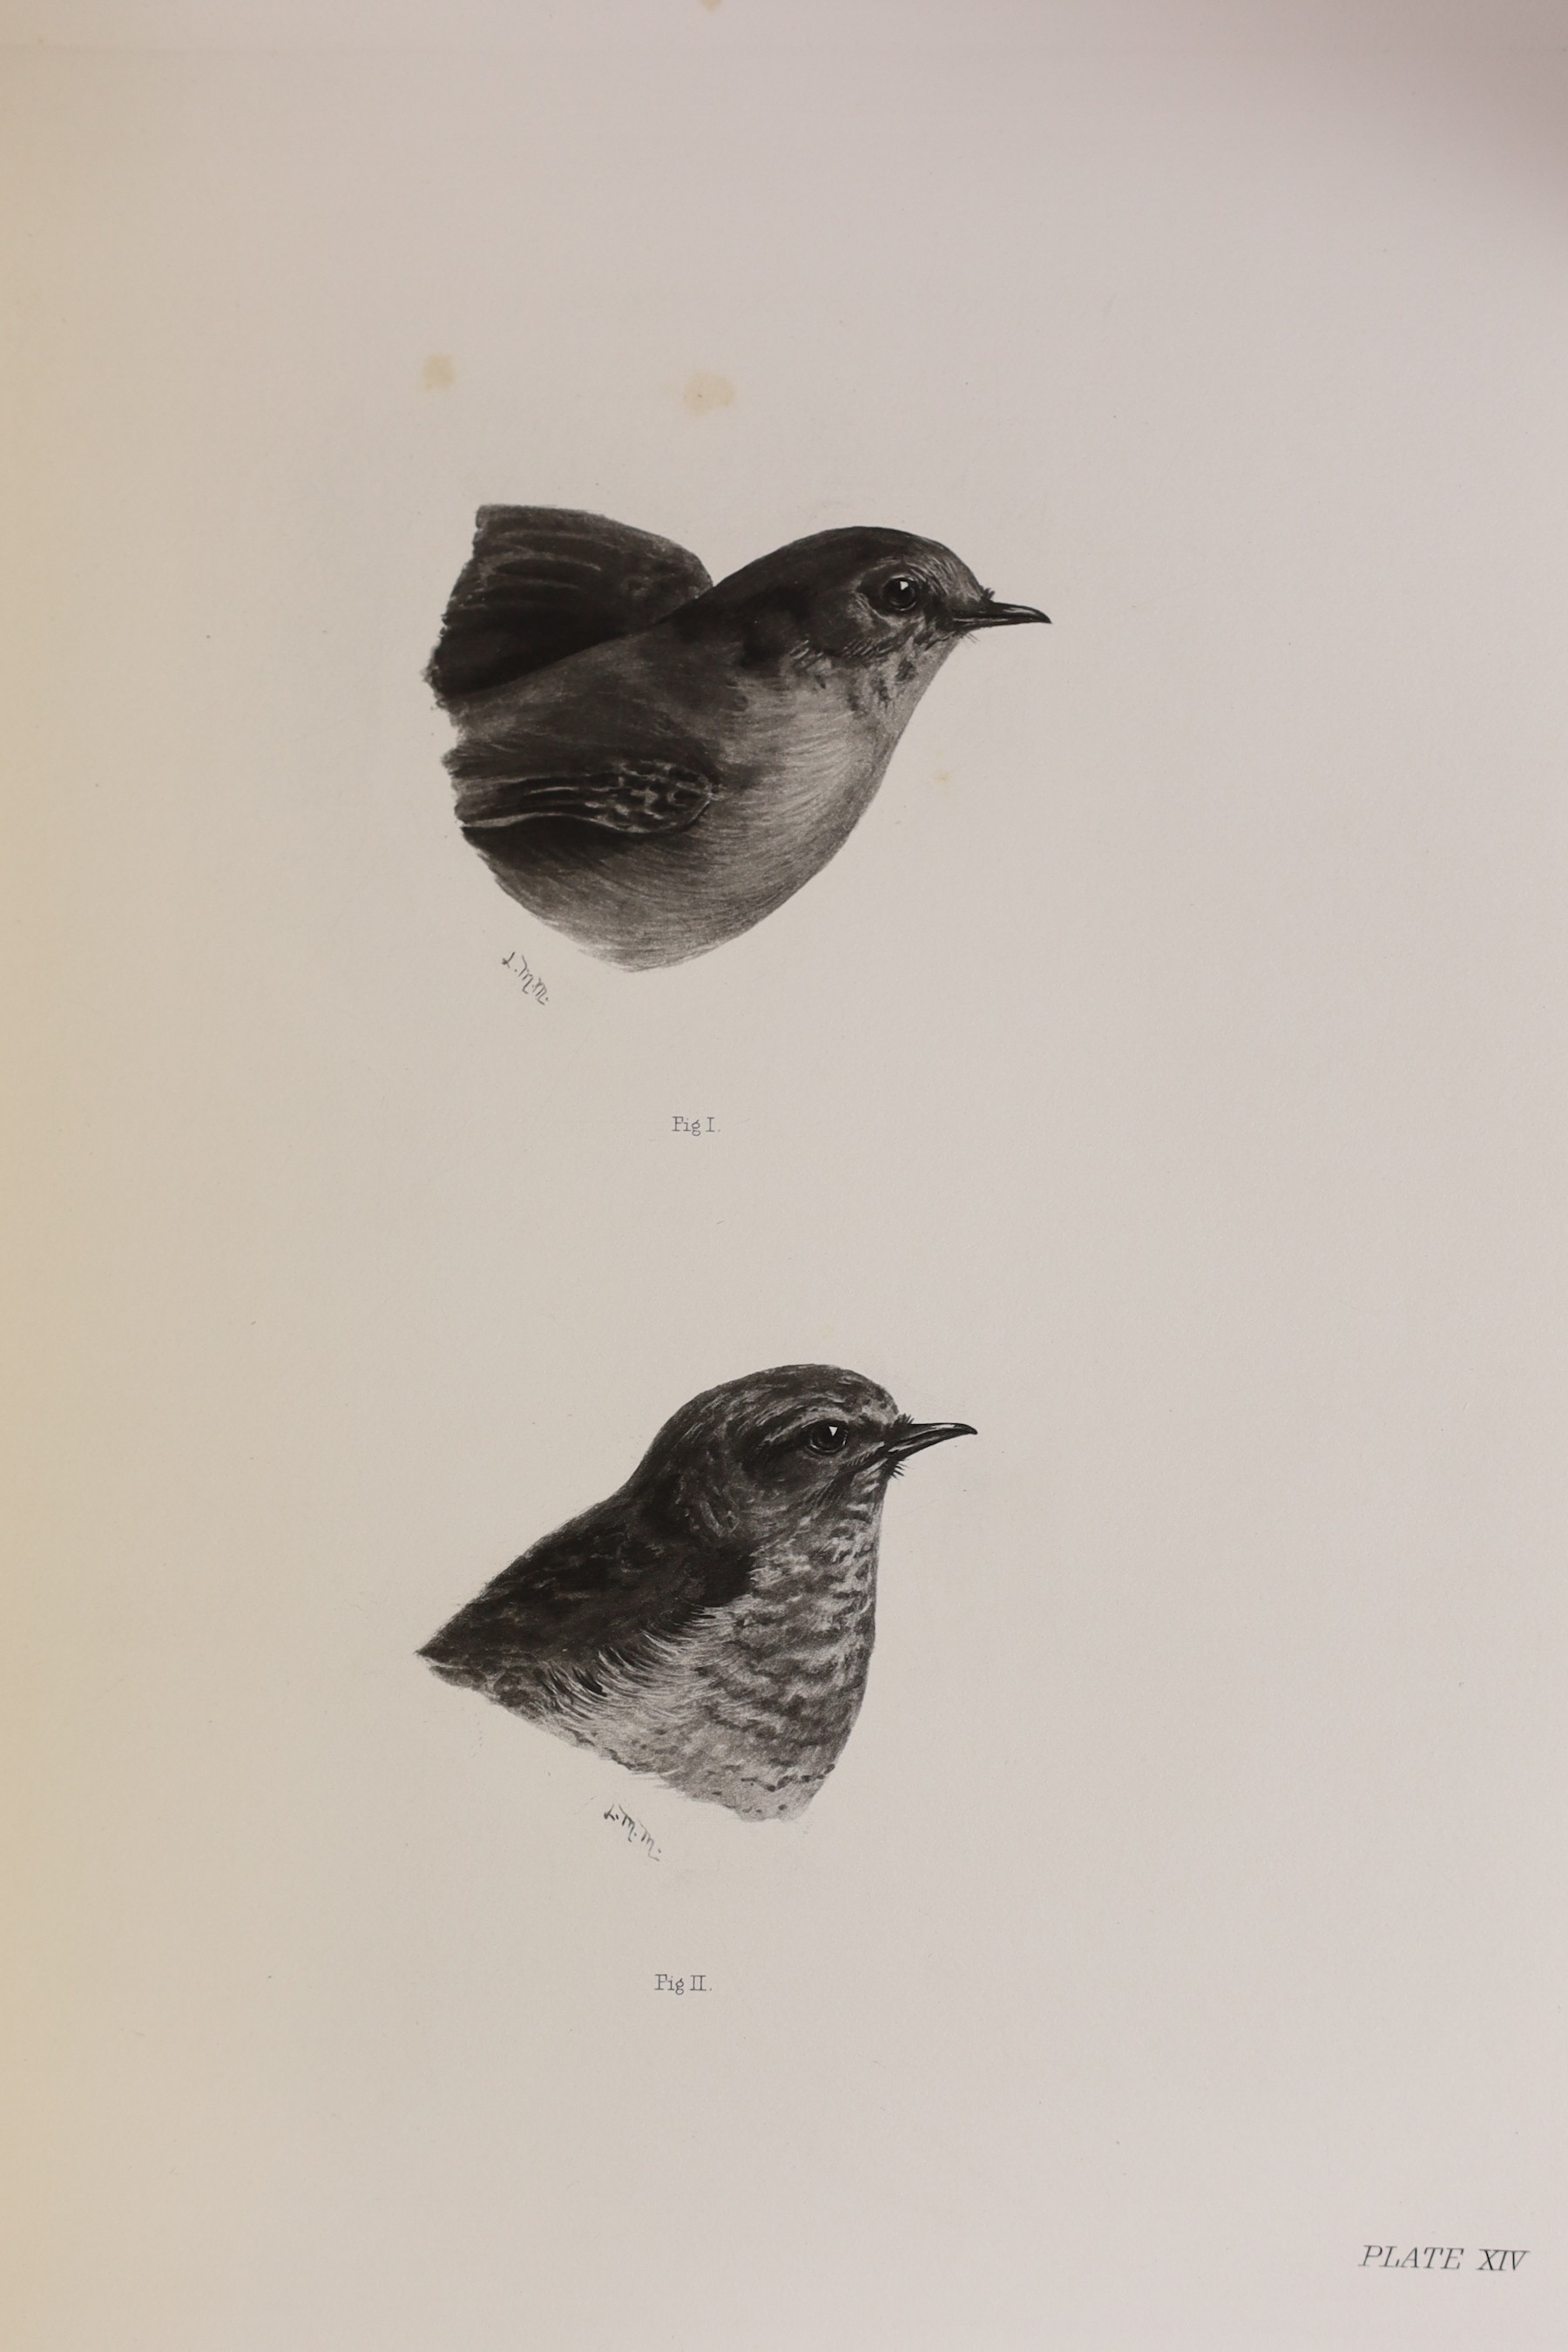 Stonham, Charles - The Birds of the British Islands, 5 vols, 4to, original cloth, illustrated by Lilian Medland, with 318 engraved plates and 2 folding maps, London, 1906-11